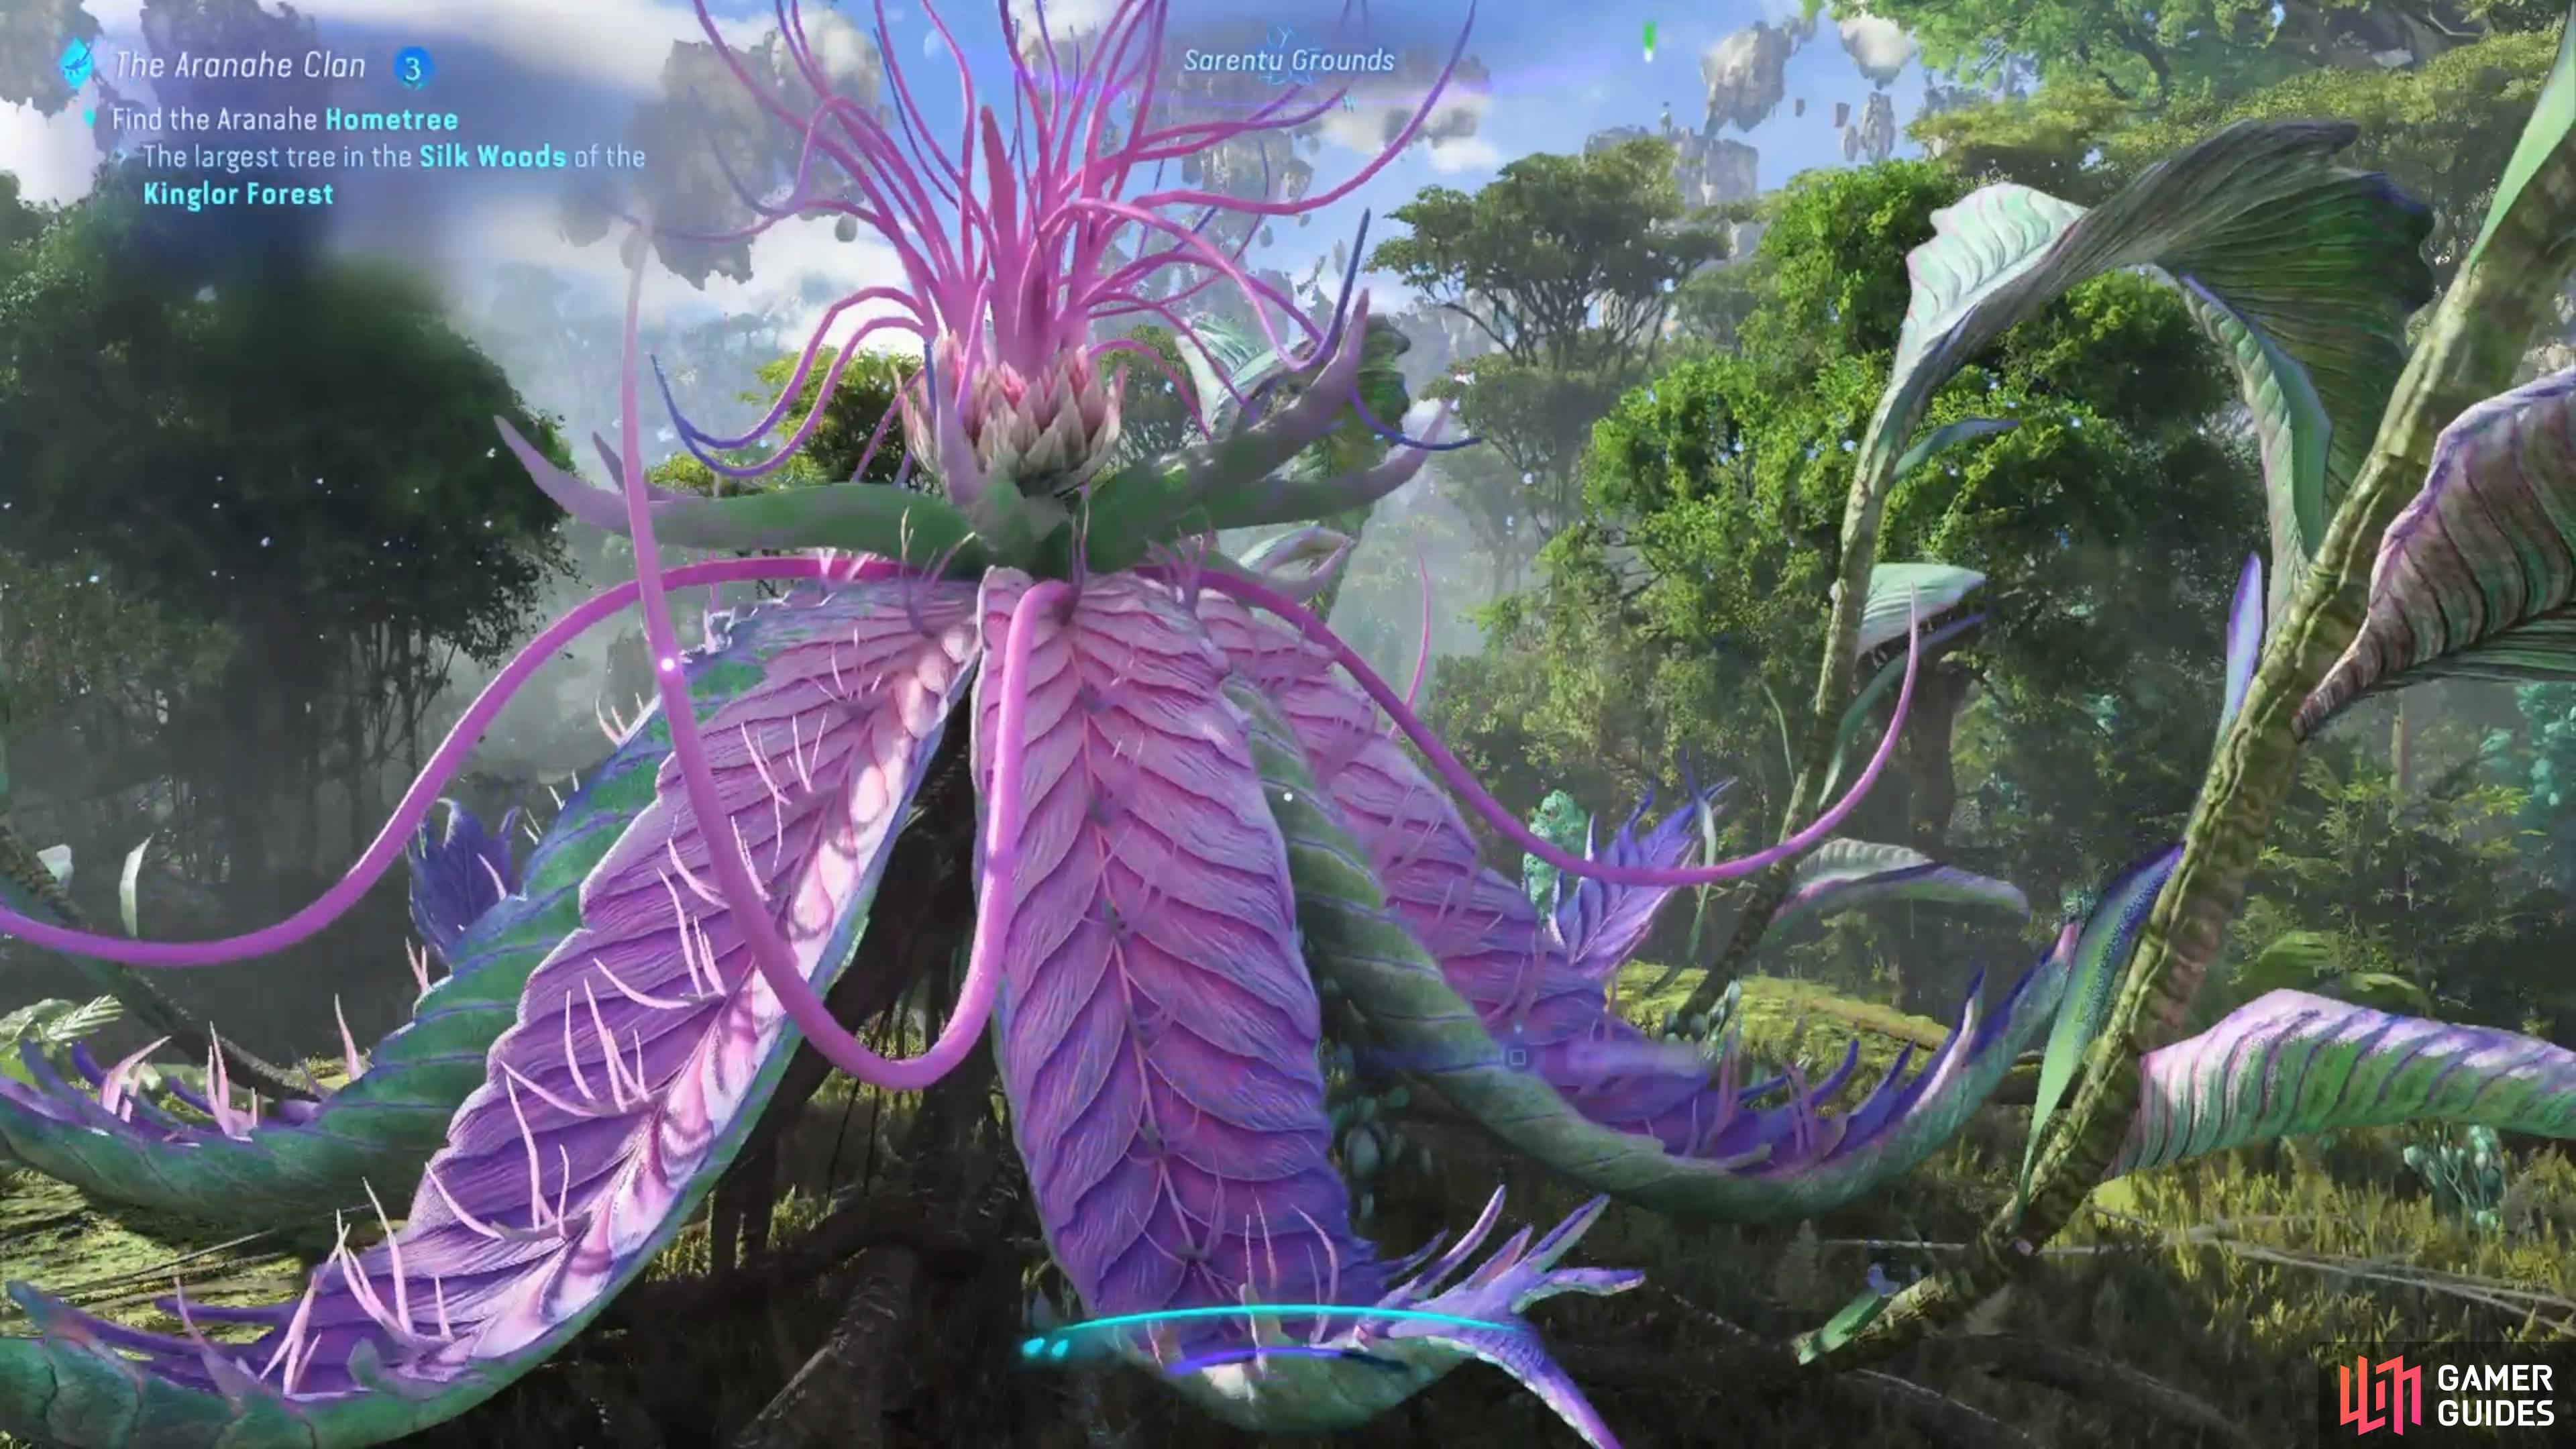 Interact with the Tarsyu plant to get the Eject Ancestor Skill.